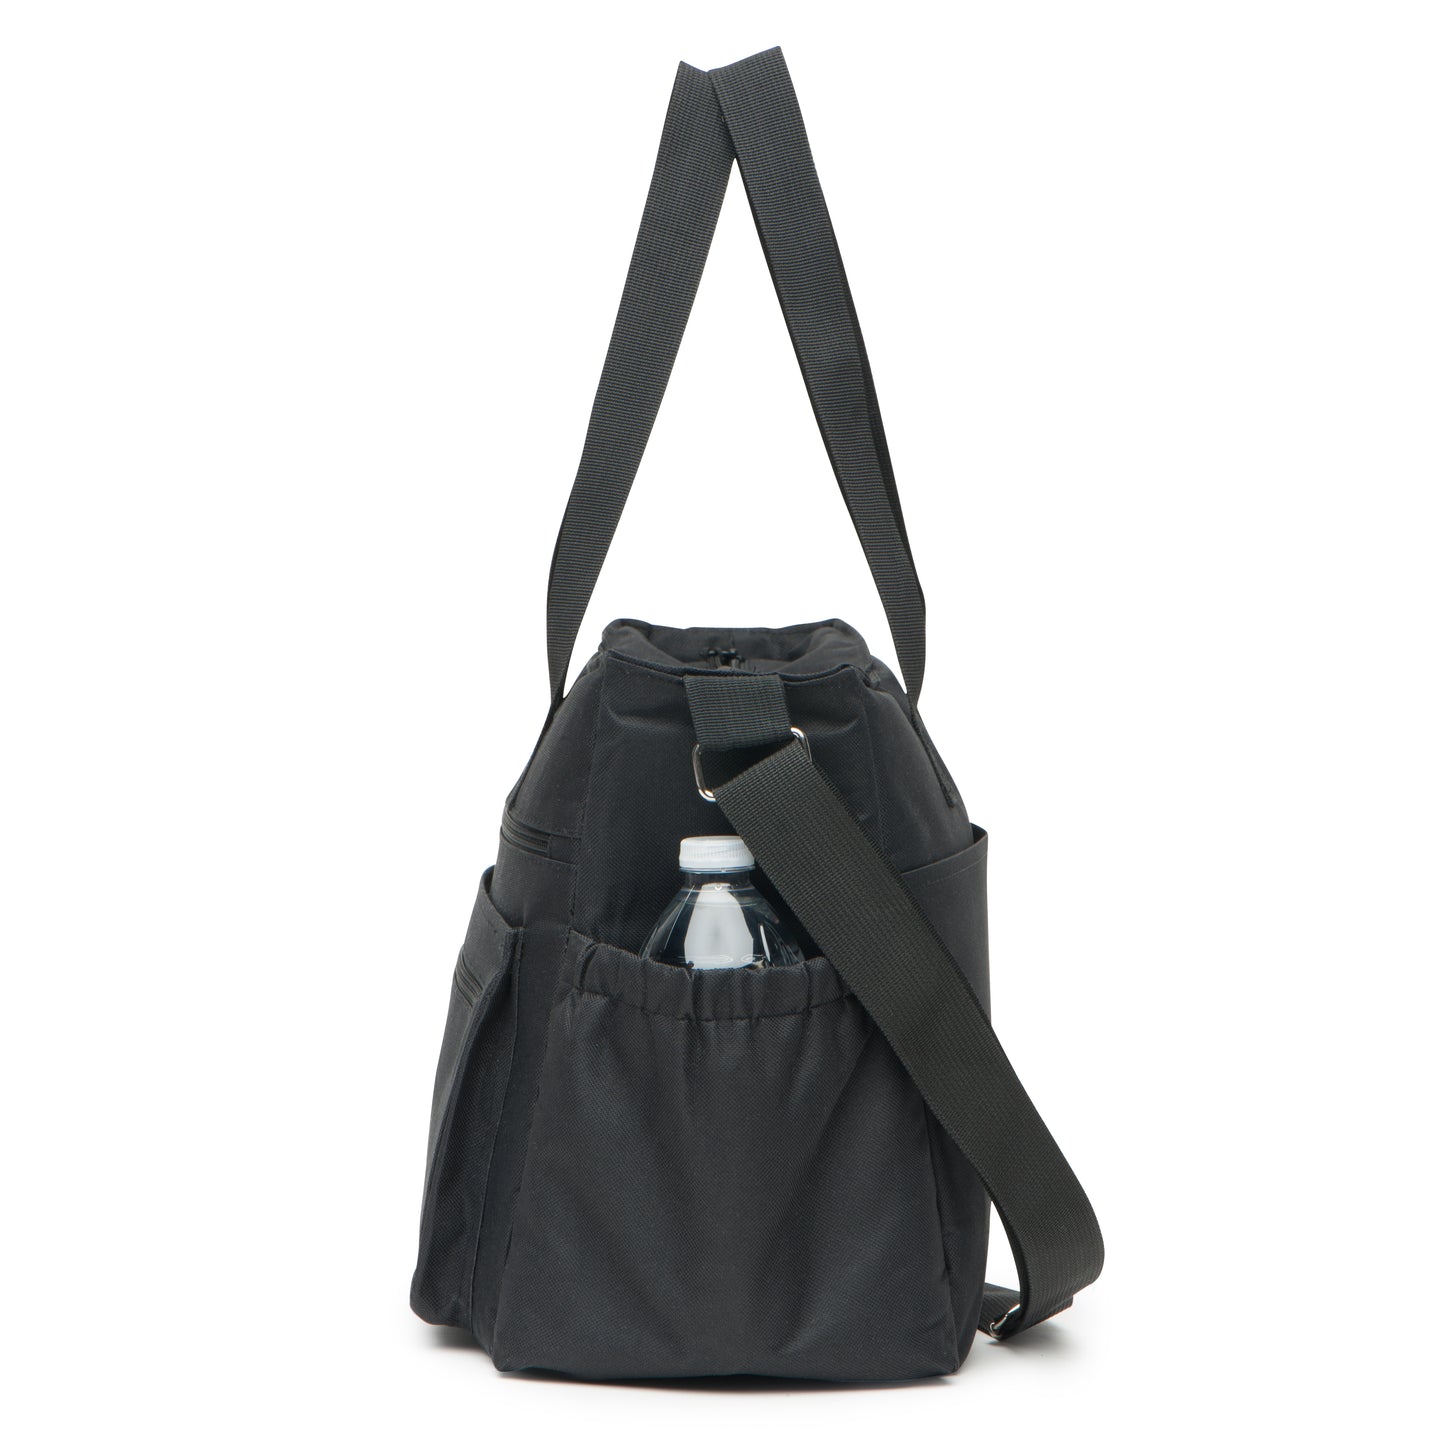 Extra Large Lunch Bag with 6 External Pockets (13.5x10.5x7 Inches).